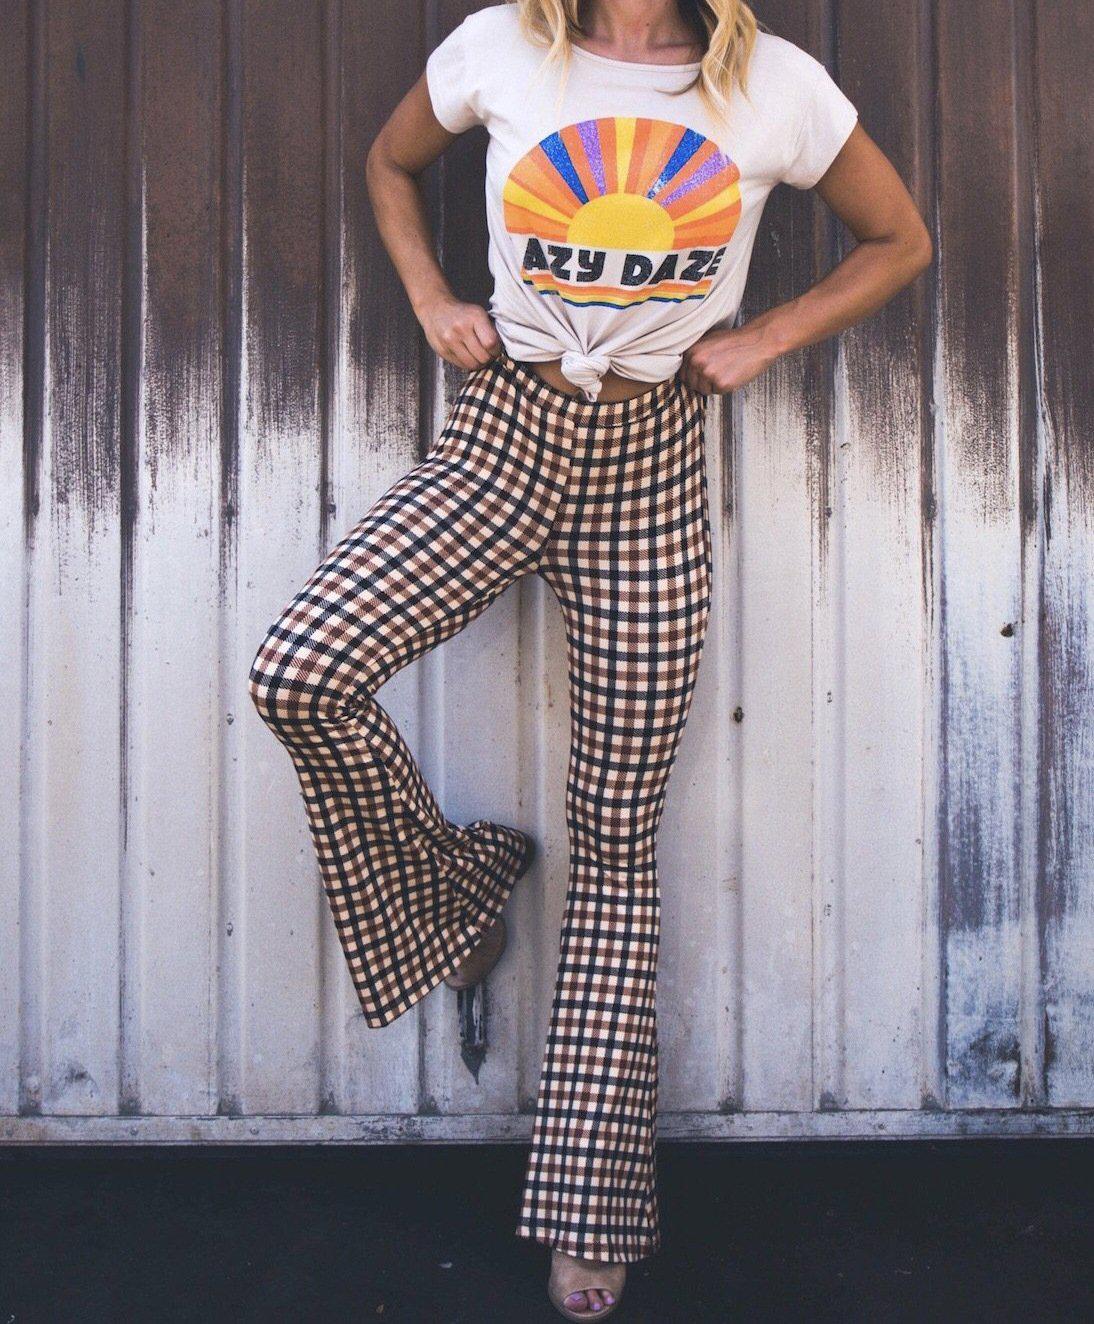 Vintage Plaid High Waist Long Flare Bell-Bottom Pants-ChicBohoStyle